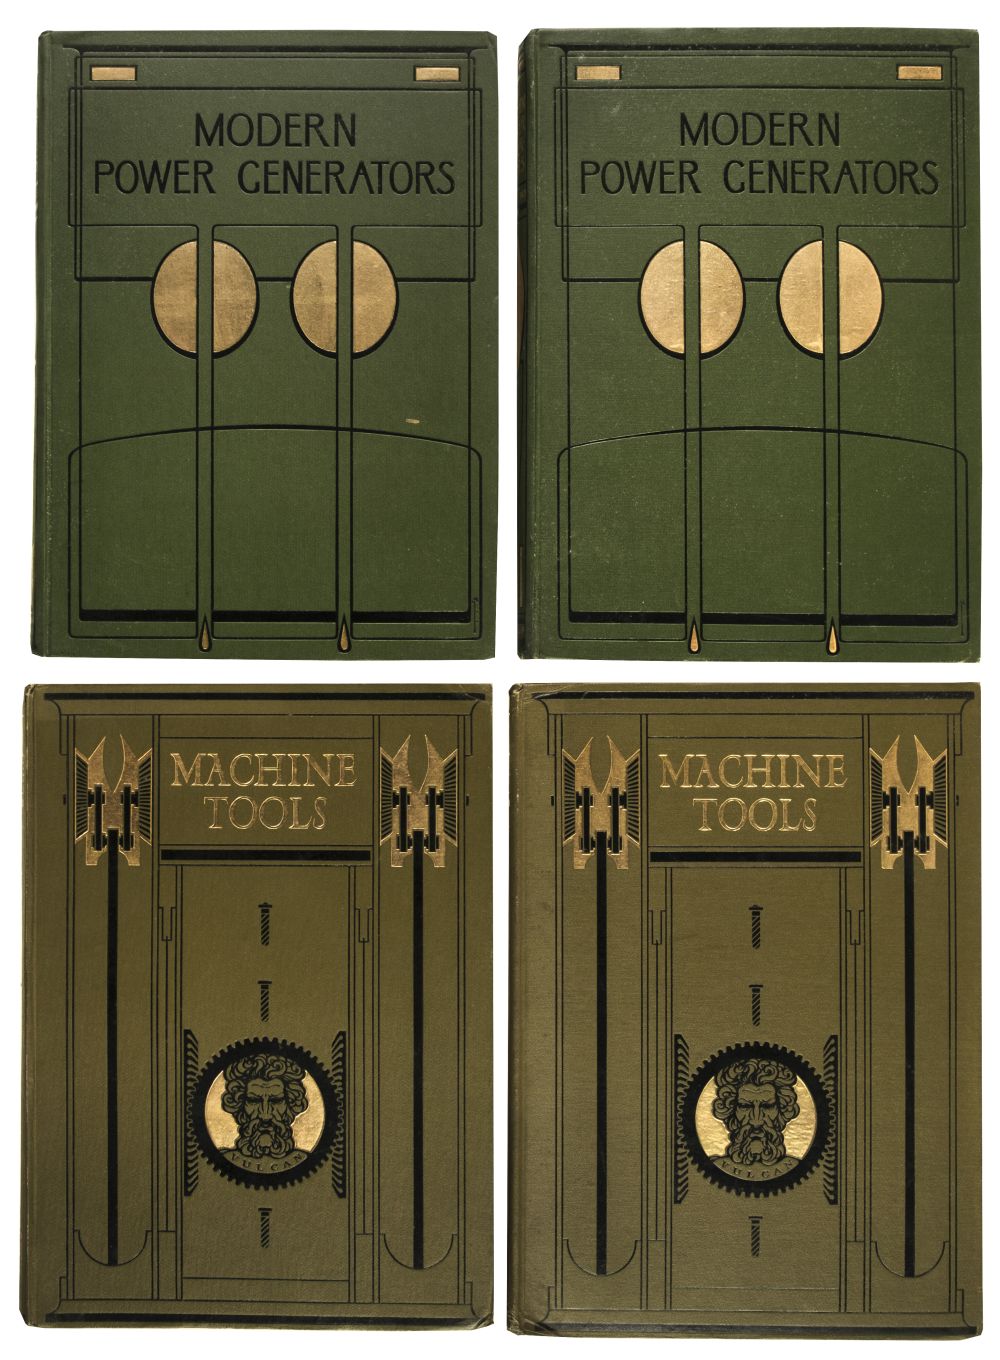 Talwin Morris Bindings. Modern Power Generators, Steam Electric..., 1908..., and others